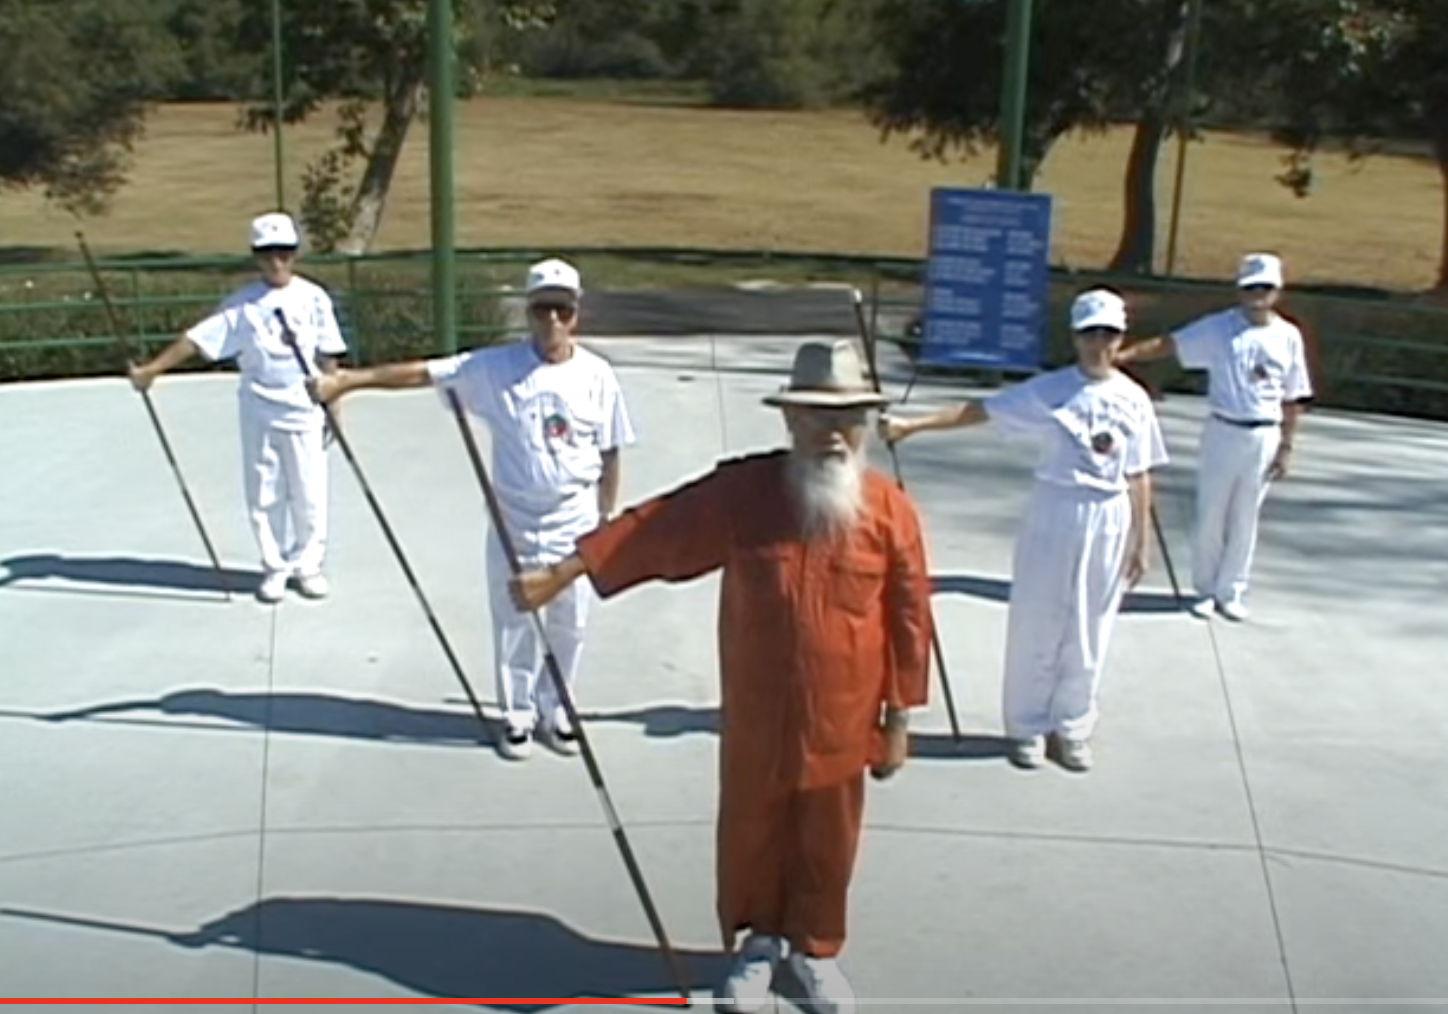 Senior Vietnamese man with white hat, holding stick, teaches an exercise class outdoors